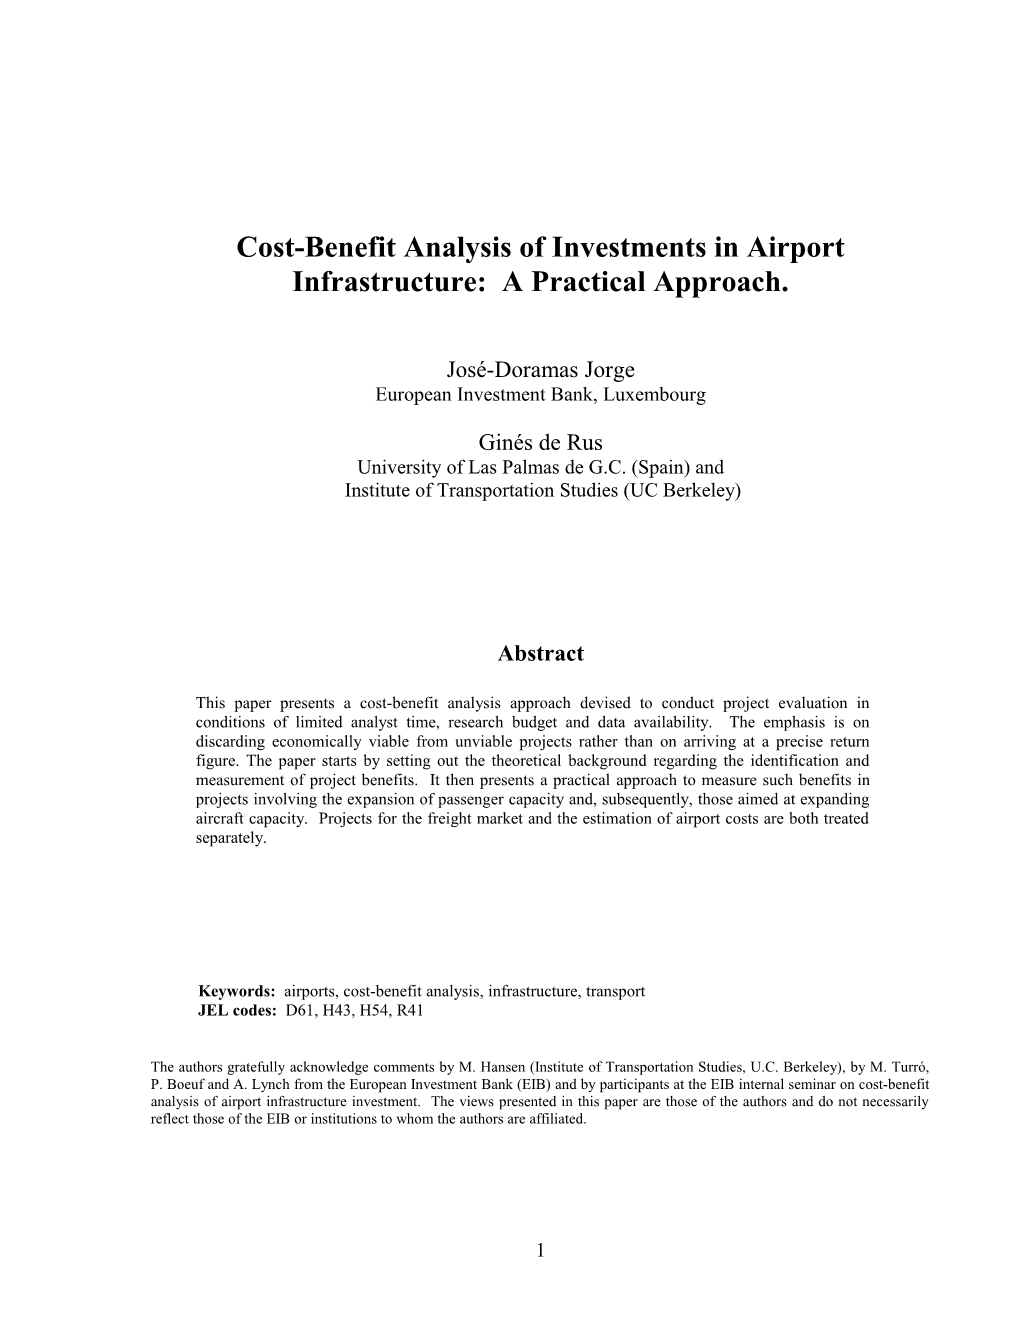 Cost-Benefit Analysis of Airport Infrastructure